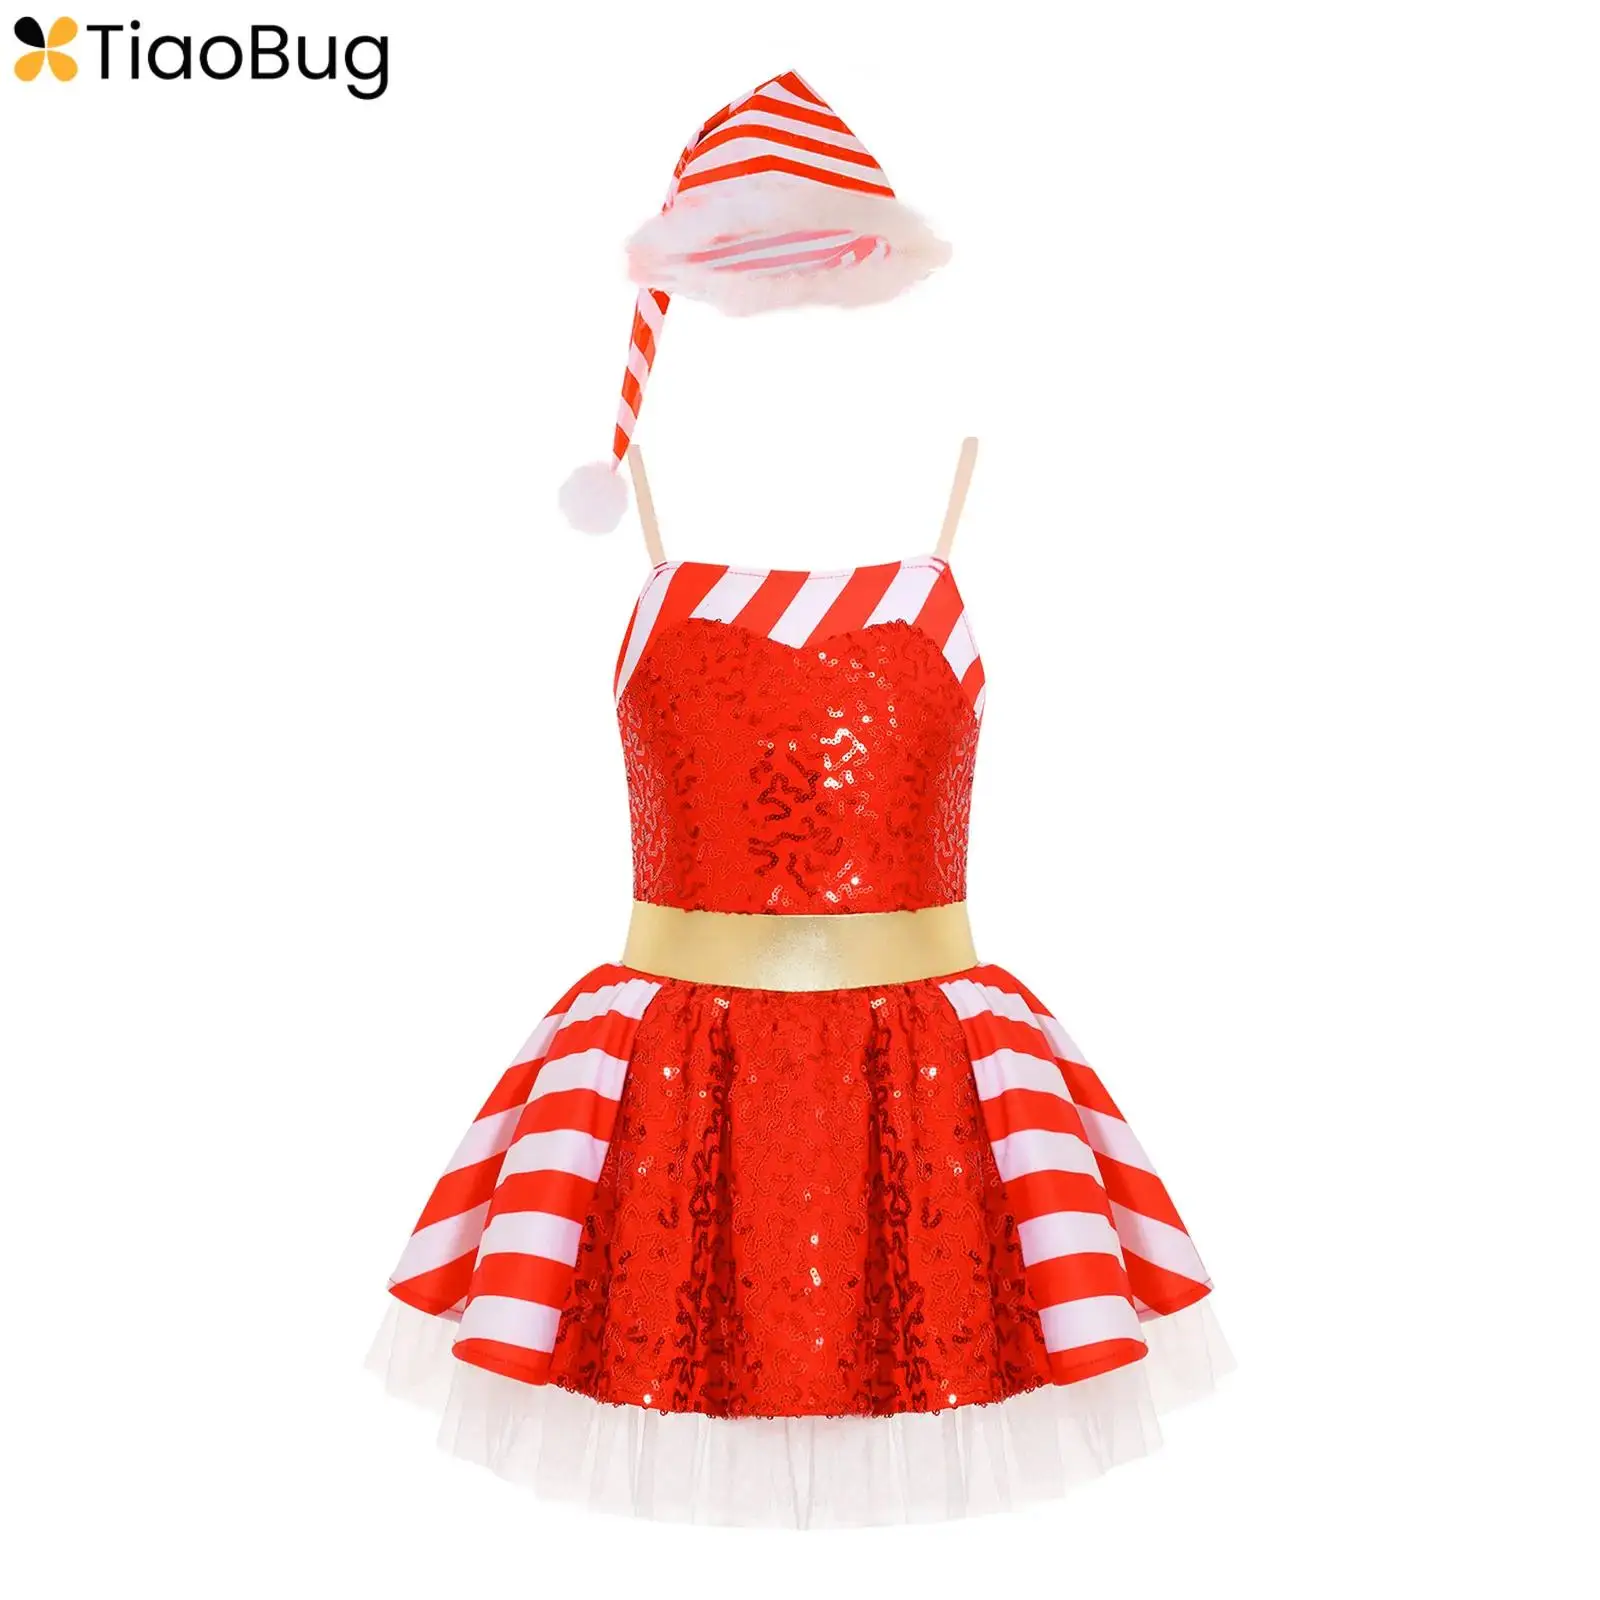 

Kids Girls Christmas Candy Cane Costume Ballet Dance Skating Sequin Striped Tutu Dress with Hat Xmas Party Santa Claus Cosplay